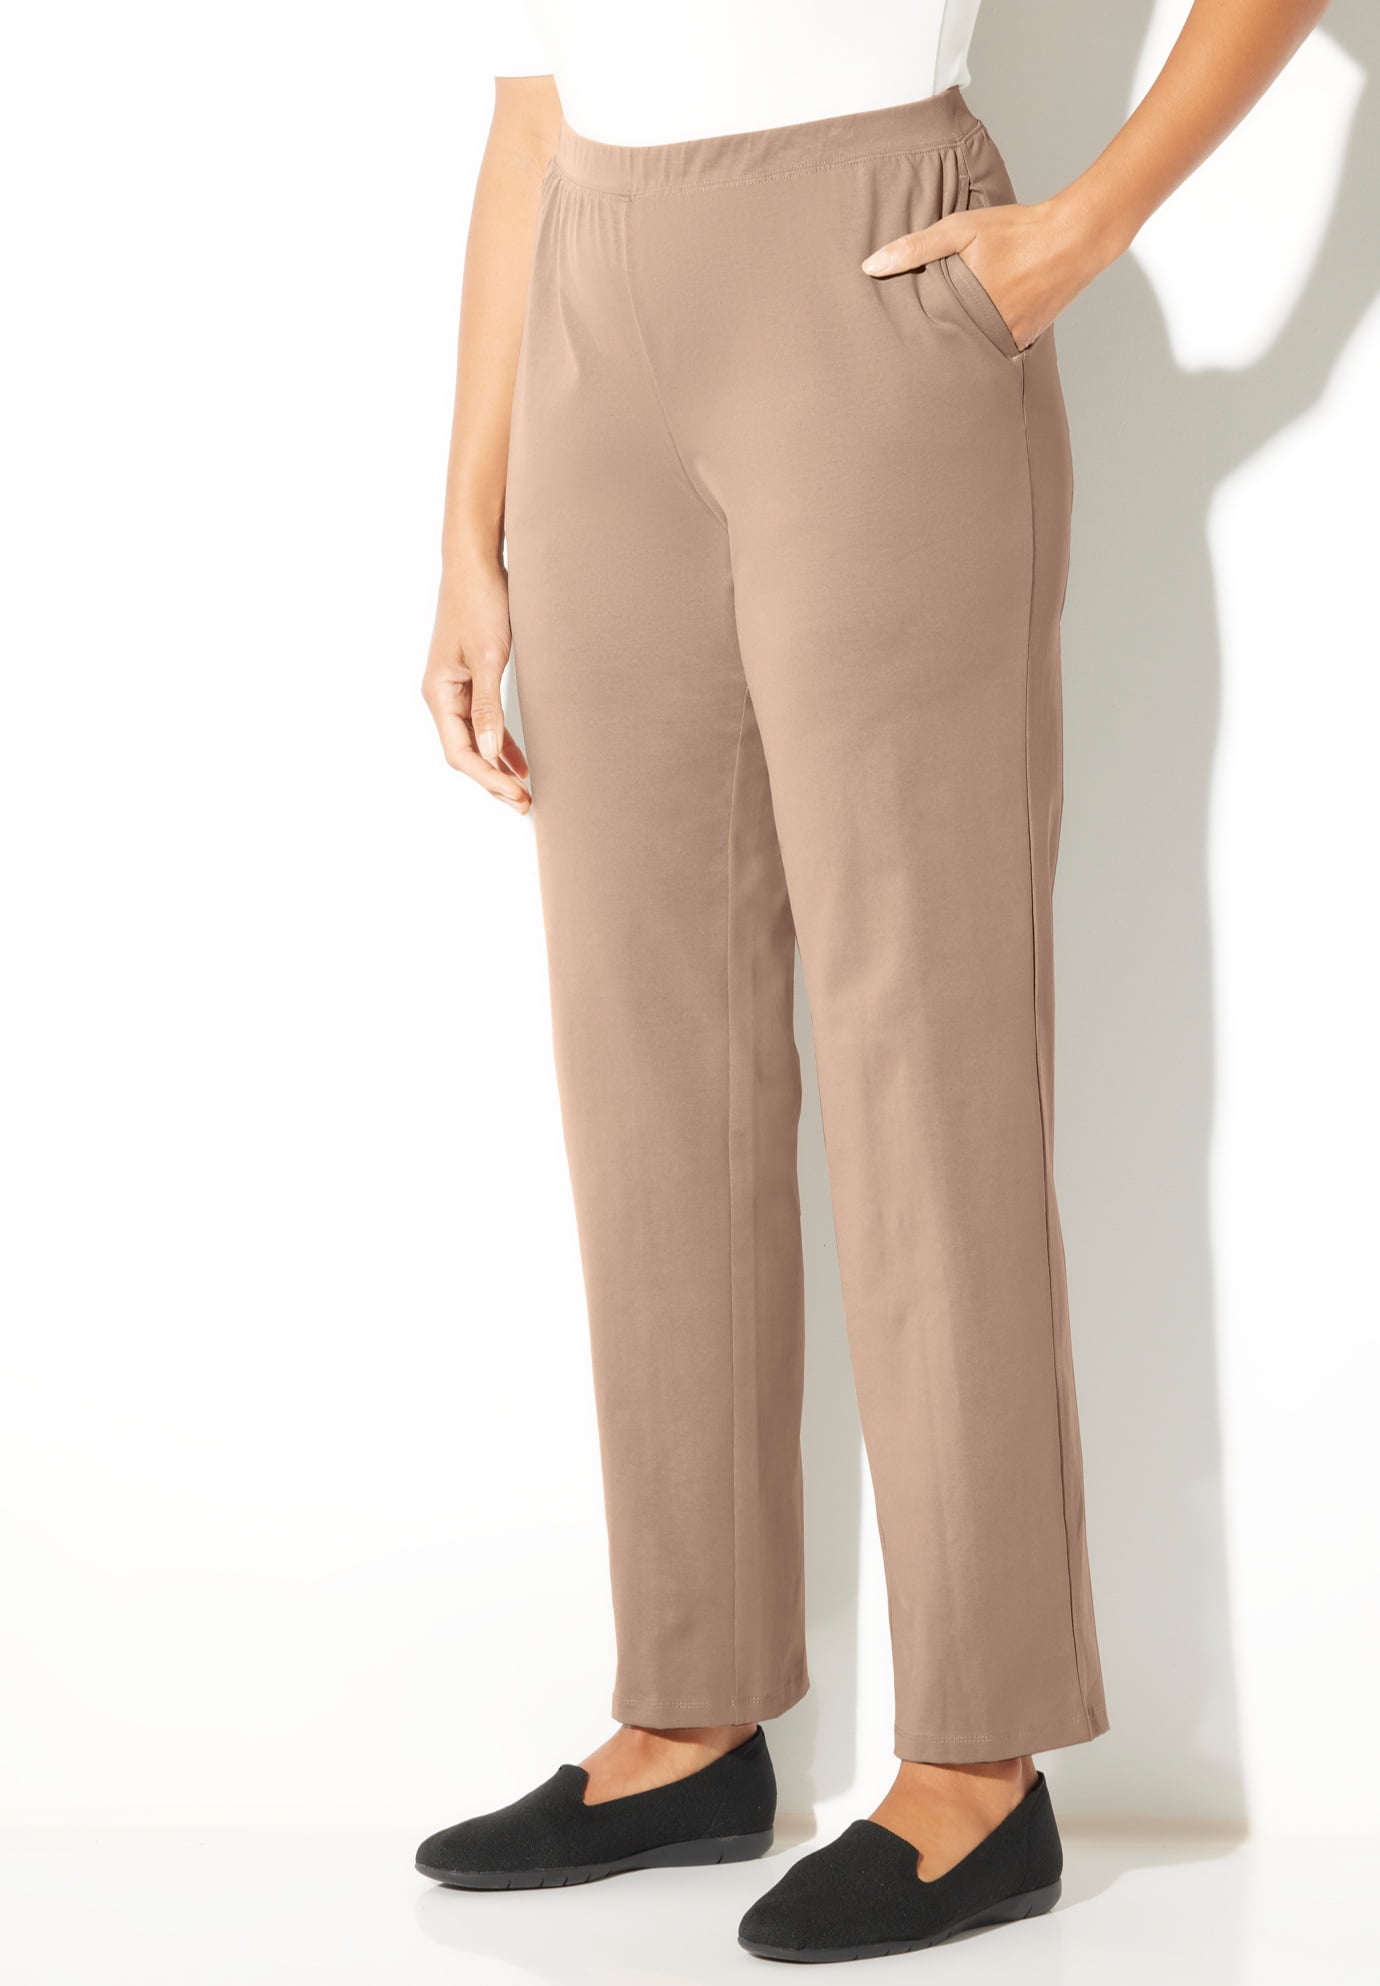 Catherines Women's Plus Size Tall Suprema Pant